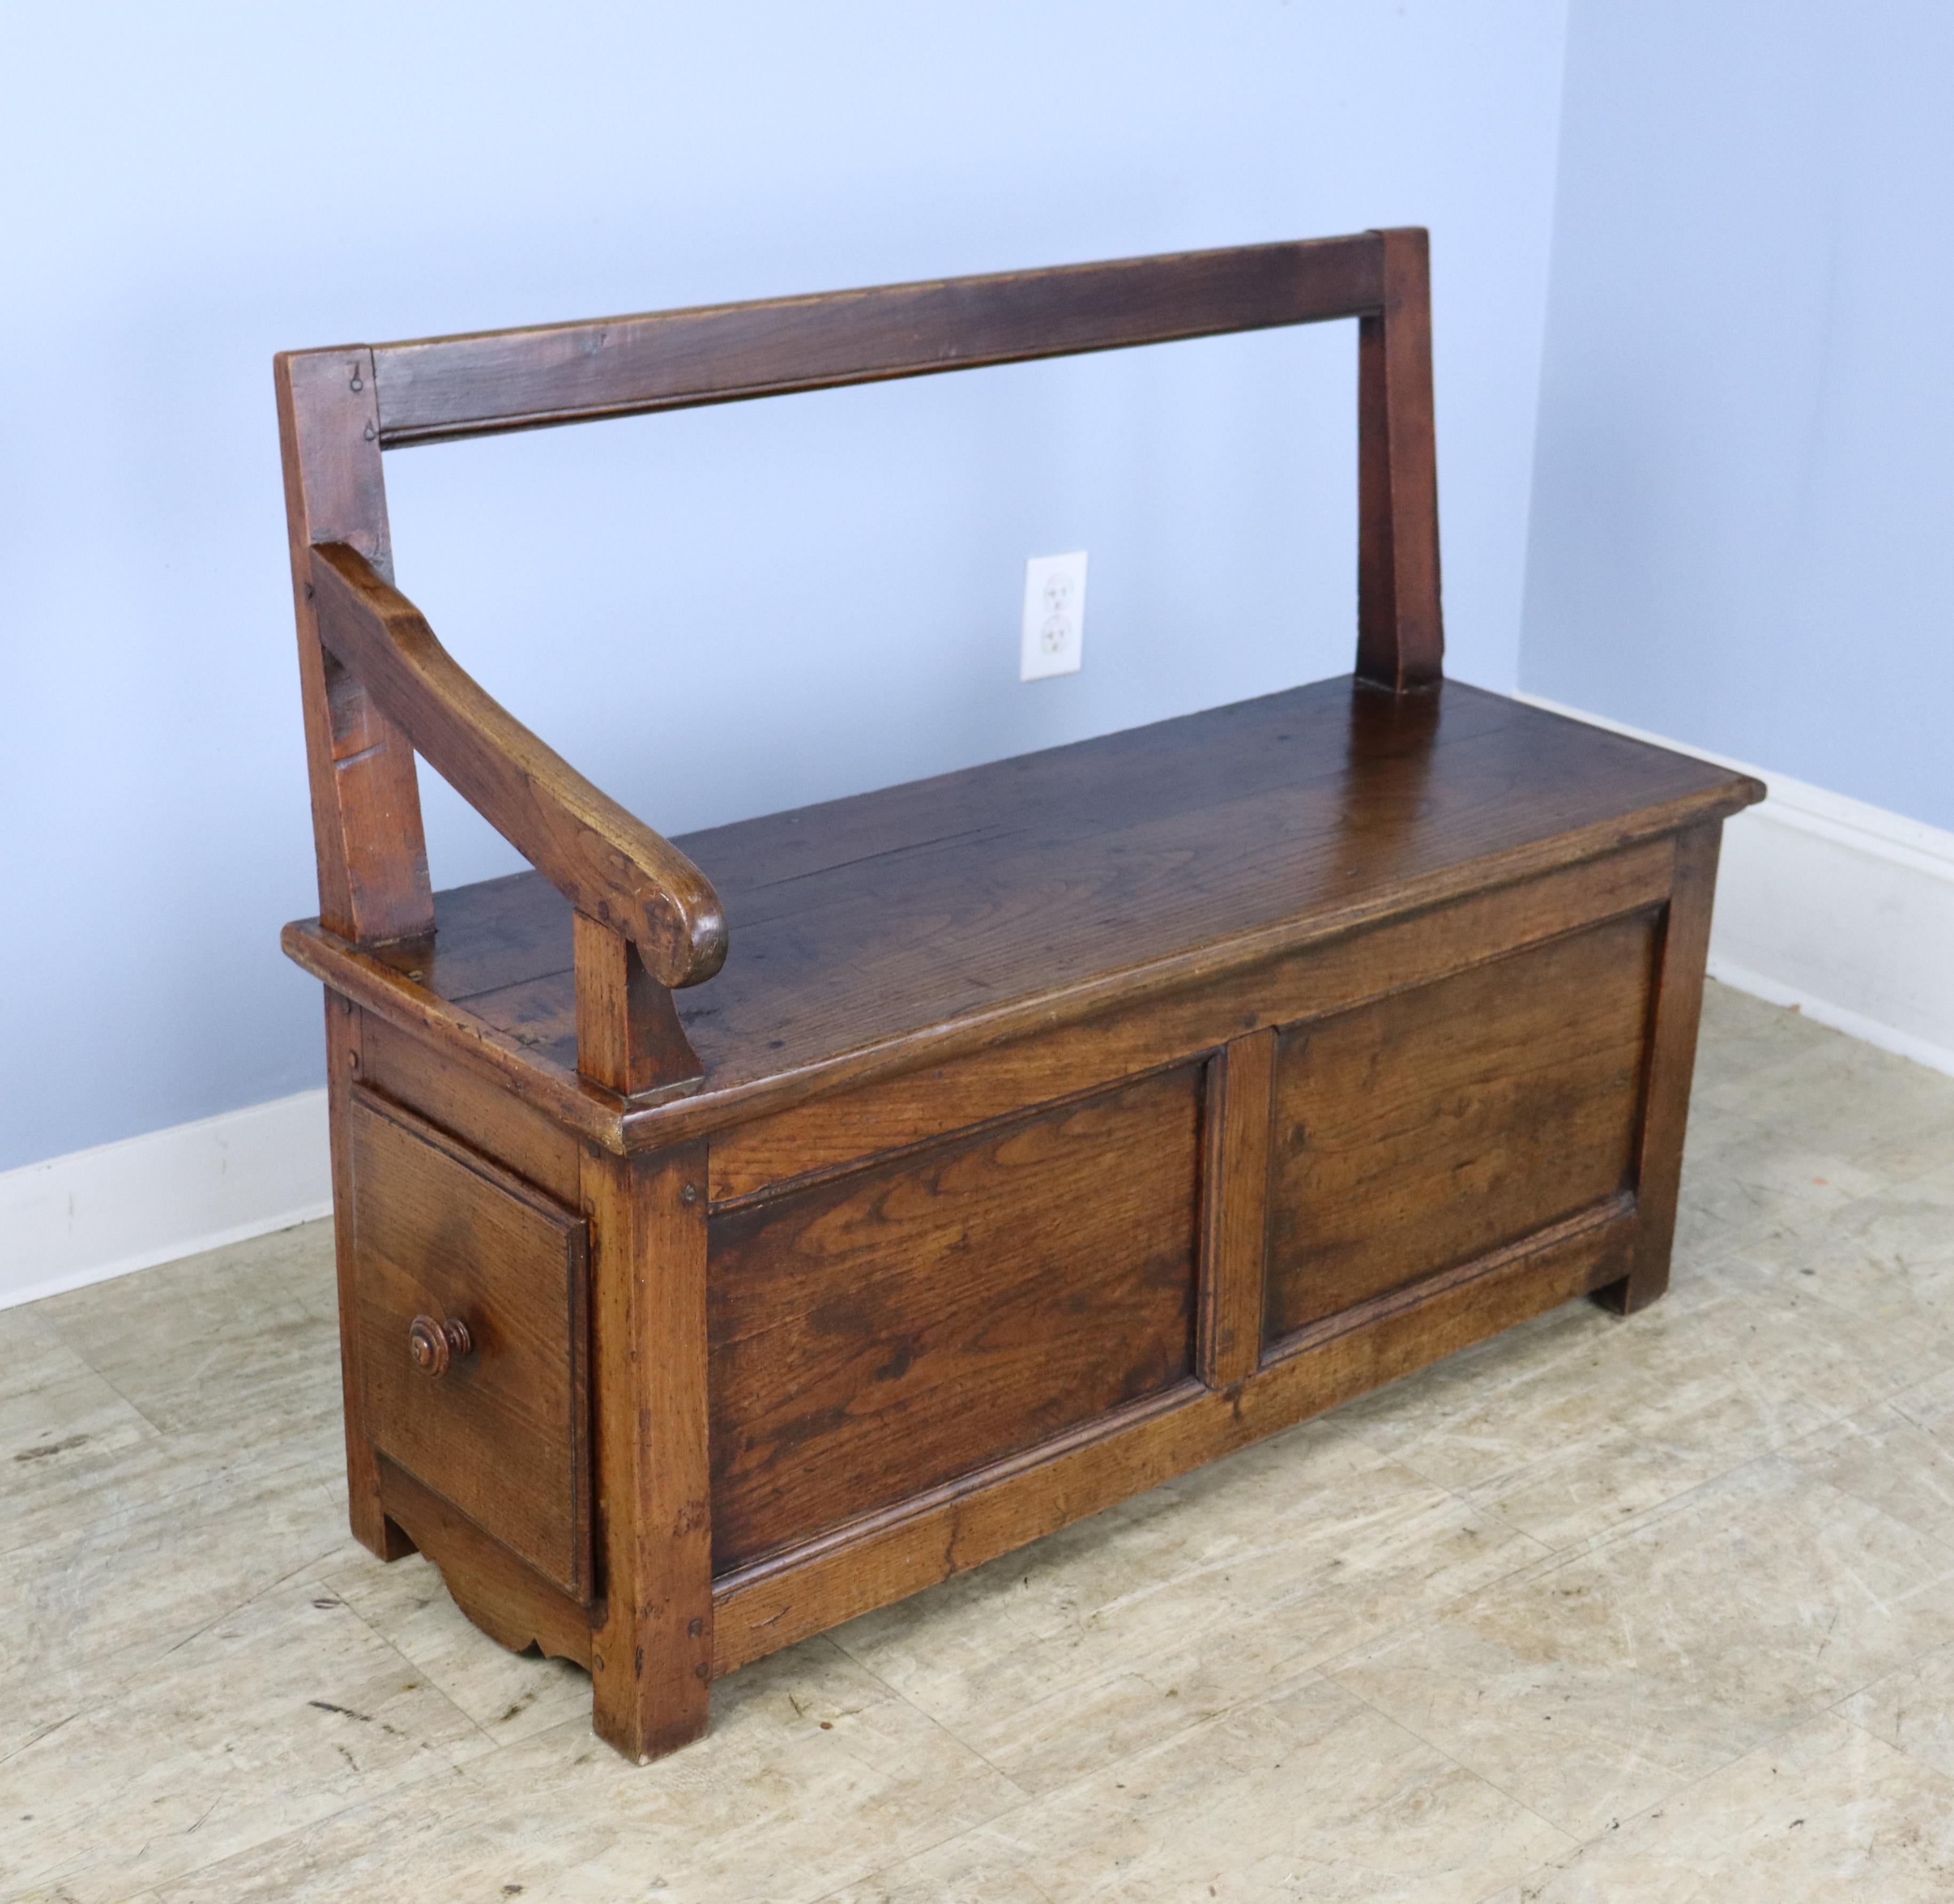 This country chestnut bench has very good grain and an elegant appearance. A simple silhouette with a high back and gently sloping single arm. The small drawer at one end of the seat adds a nice design note. Wonderful patina and color. Height